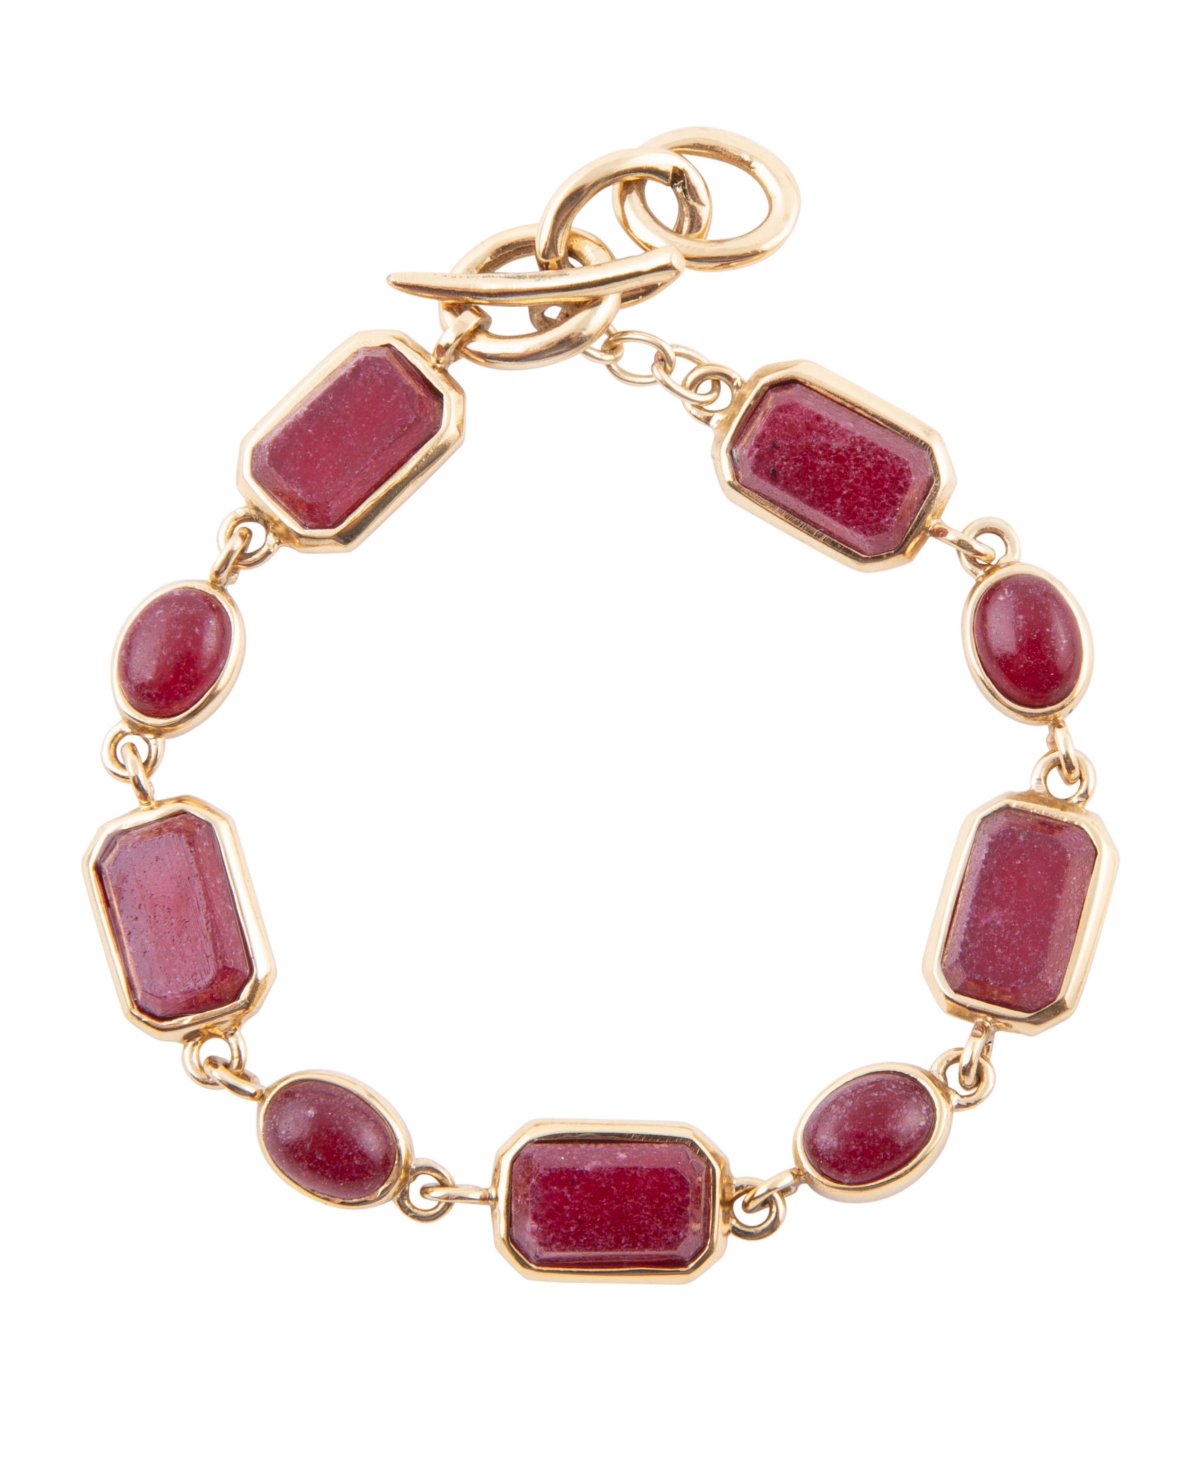 Shop Barse Delicately Genuine Red Onyx Rectangle And Circle Link Bracelet